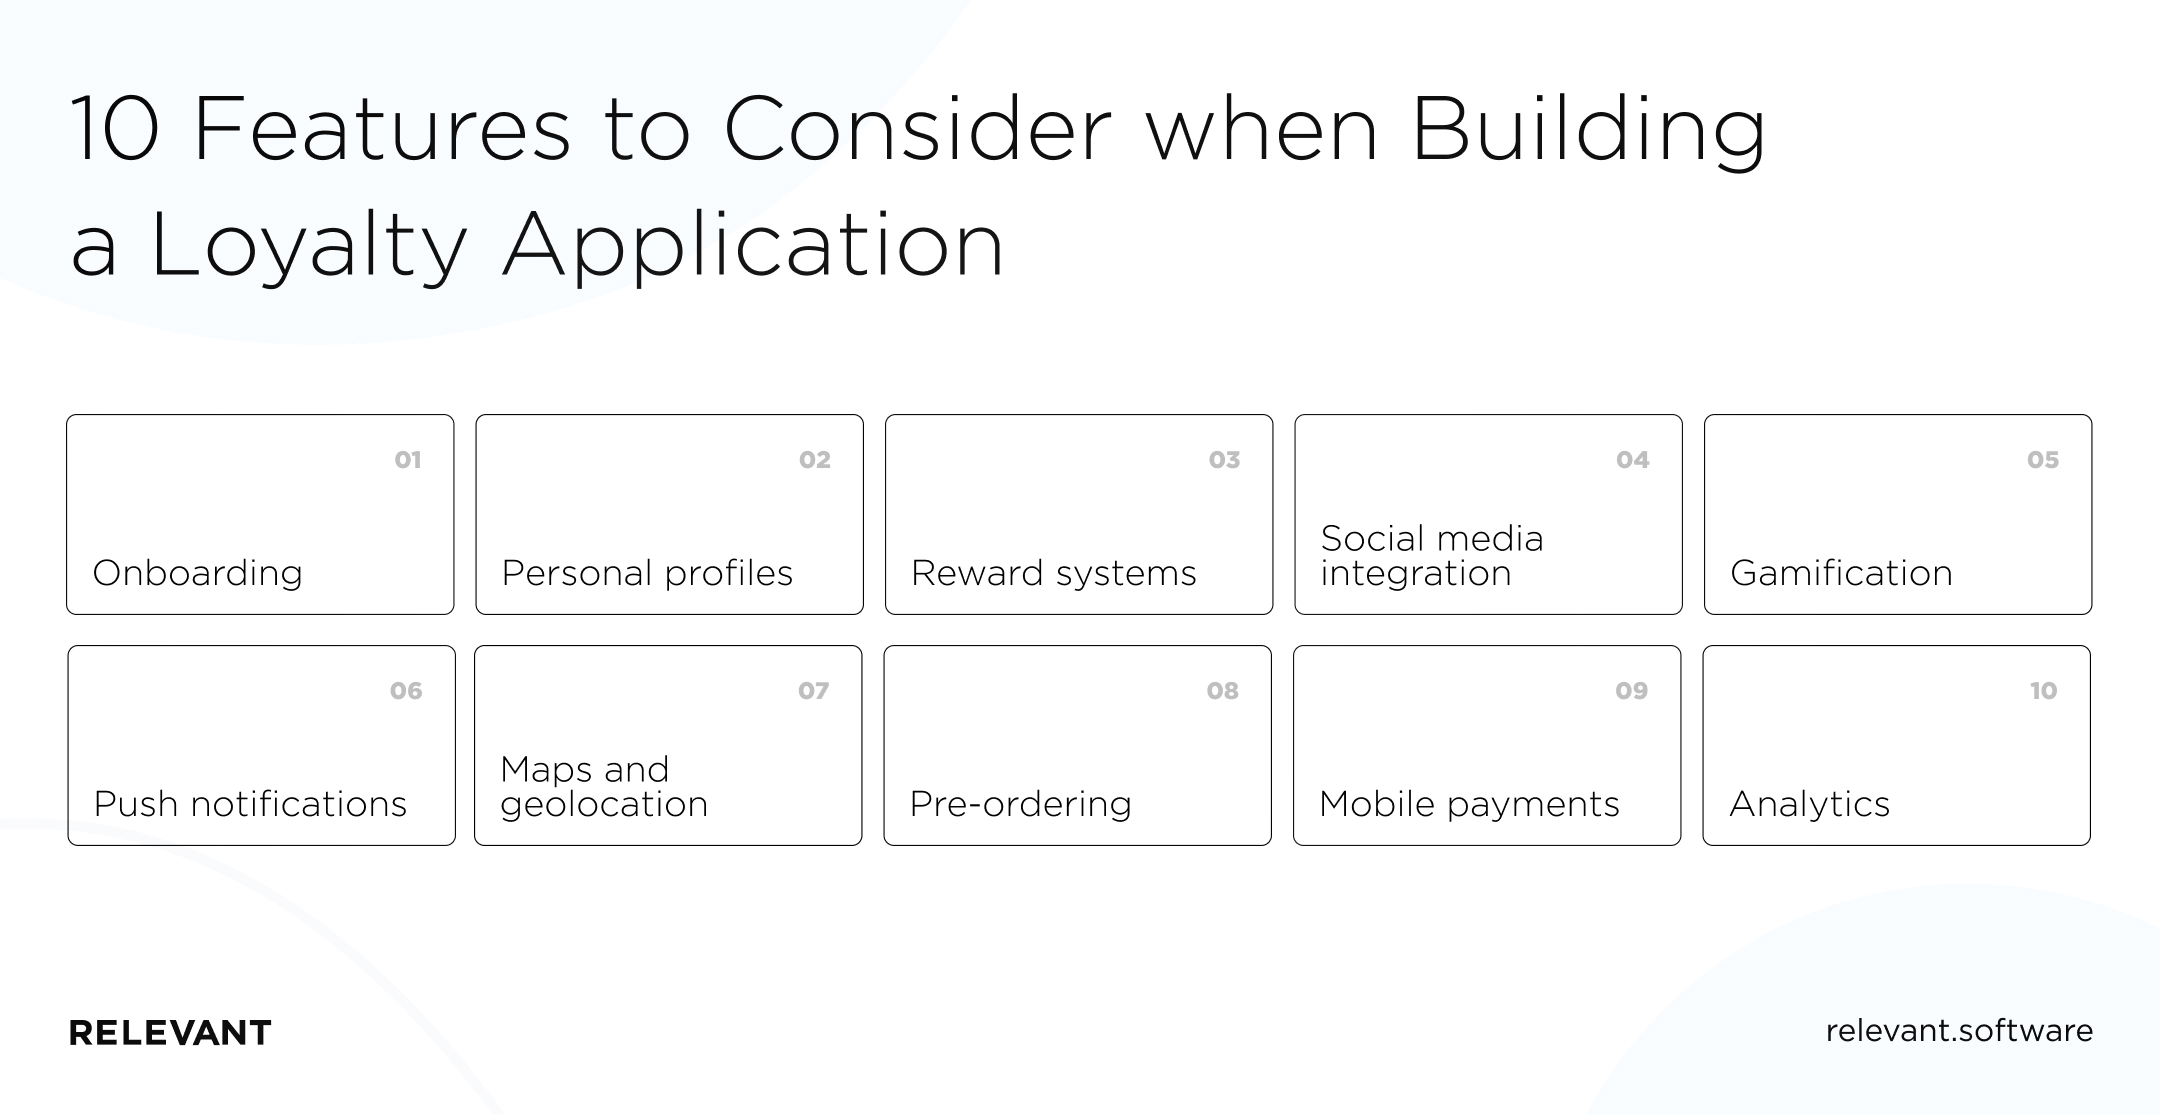 10 Features to Consider when Building a Loyalty Application